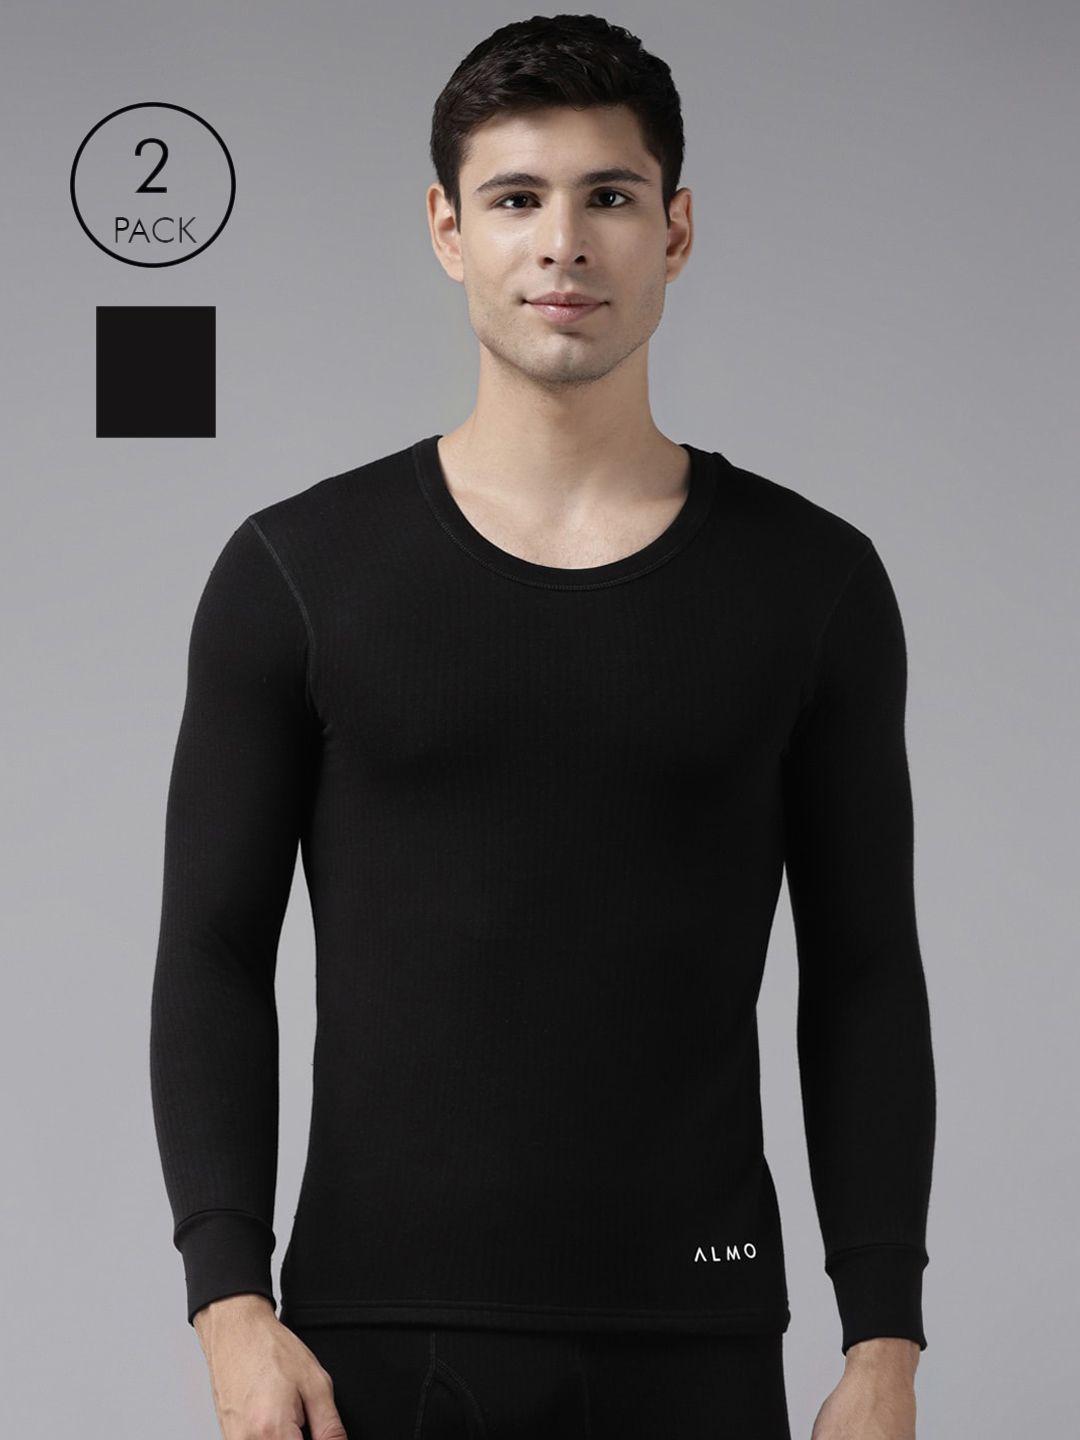 almo wear pack of 2 men black solid lightweight anti-pilling heat retention thermal top